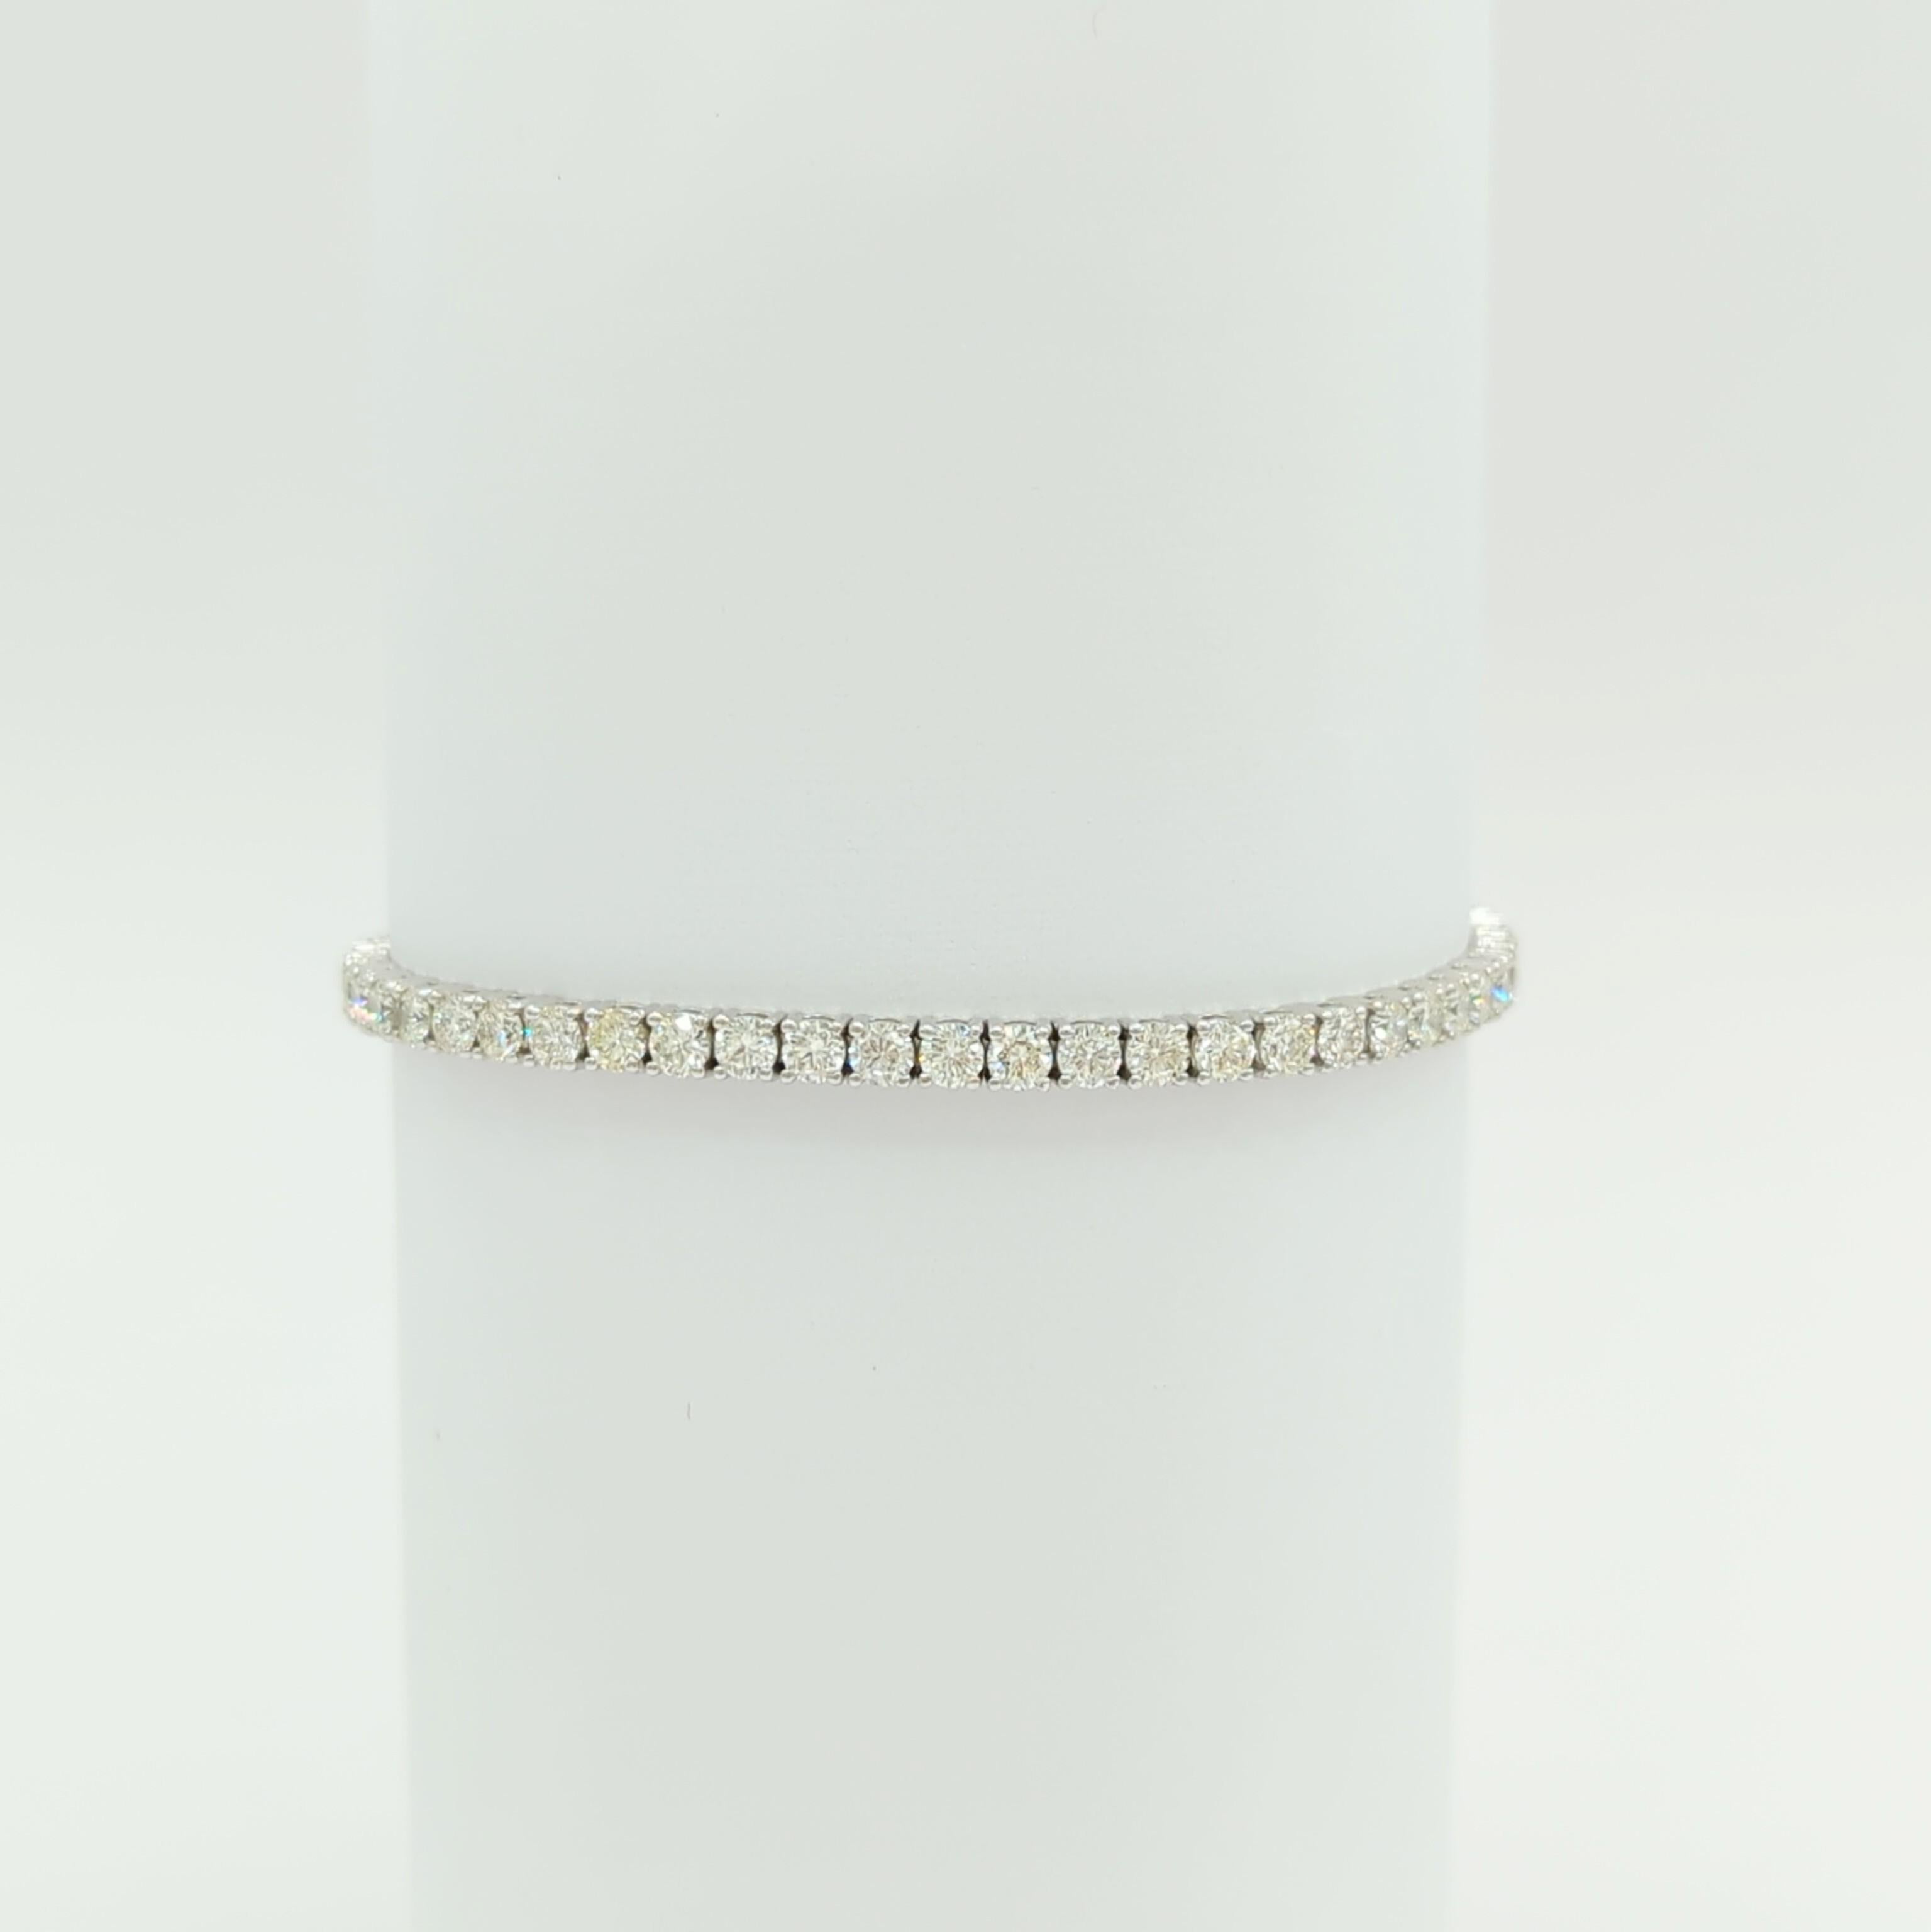 5.58 ct. White Diamond Round Tennis Bracelet in 14K White Gold In New Condition For Sale In Los Angeles, CA